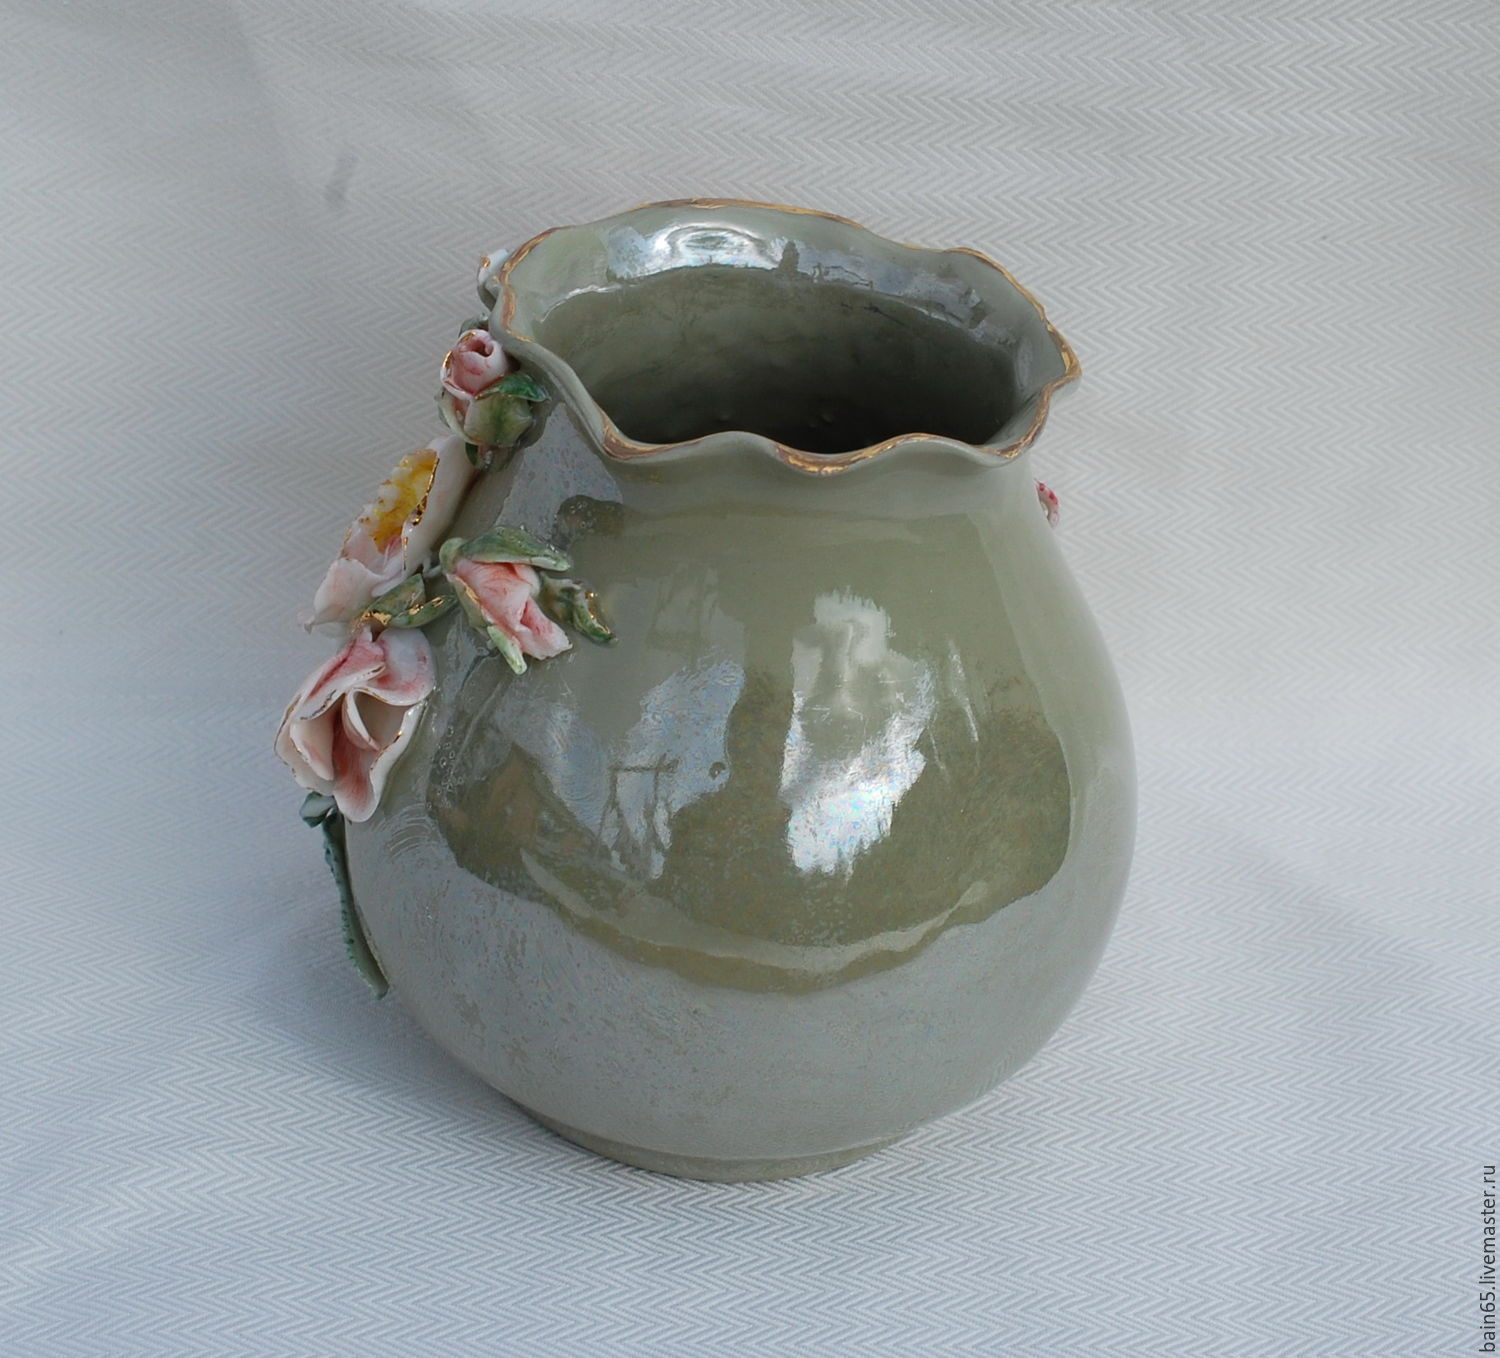 29 Recommended Pottery Vases Handmade 2024 free download pottery vases handmade of pale pink wild rose vase porcelain shop online on livemaster with for vases handmade pale pink wild rose vase porcelain mila